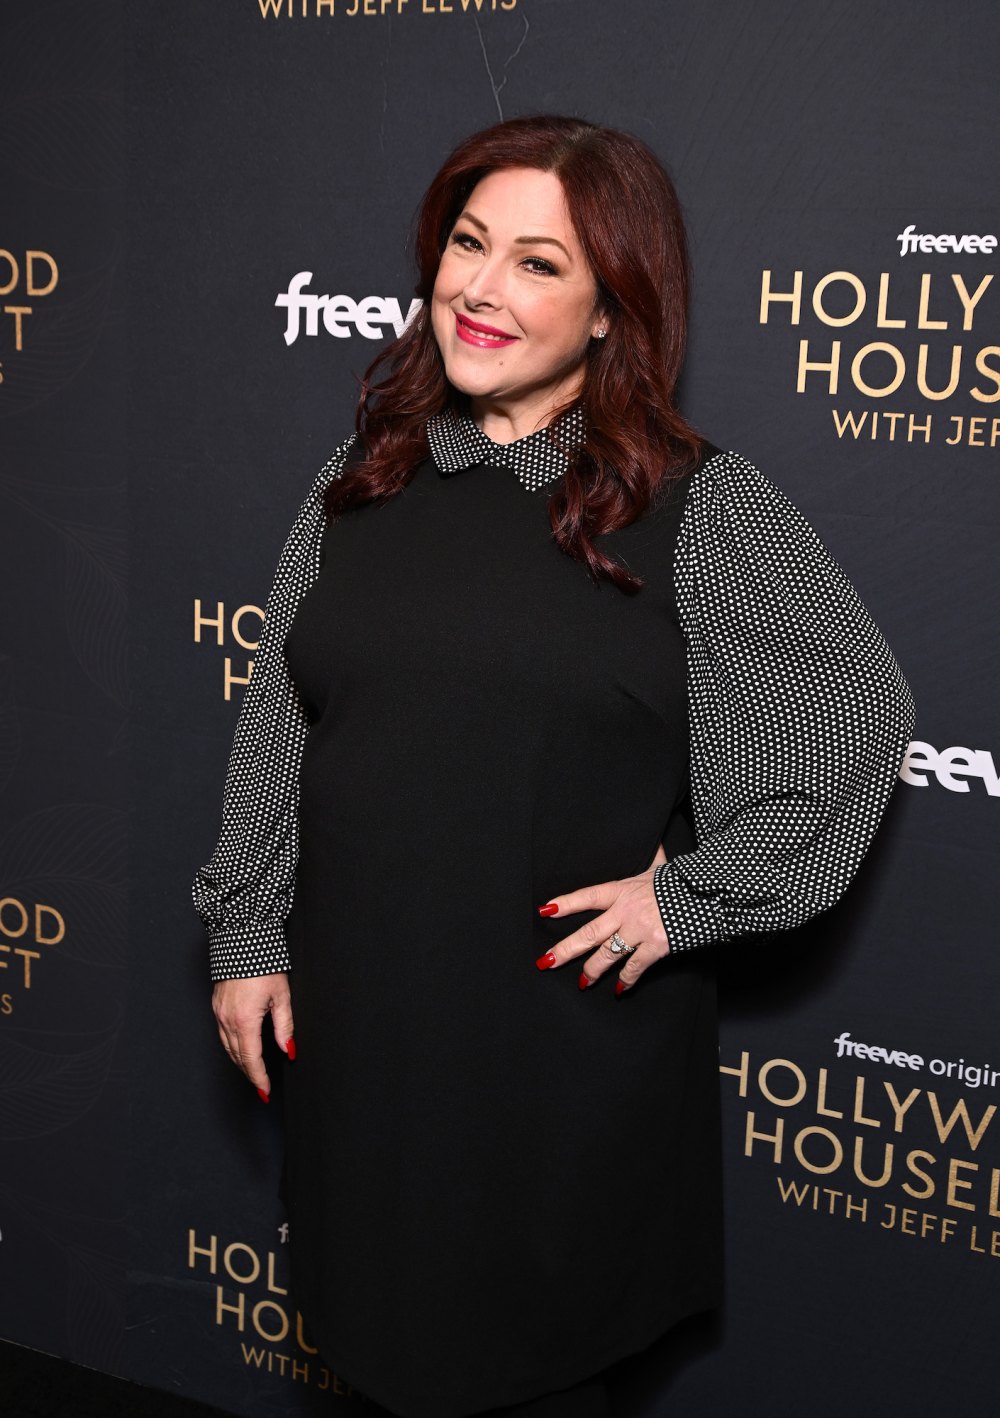 Carnie Wilson takes a bite of cake and spits it out while dieting